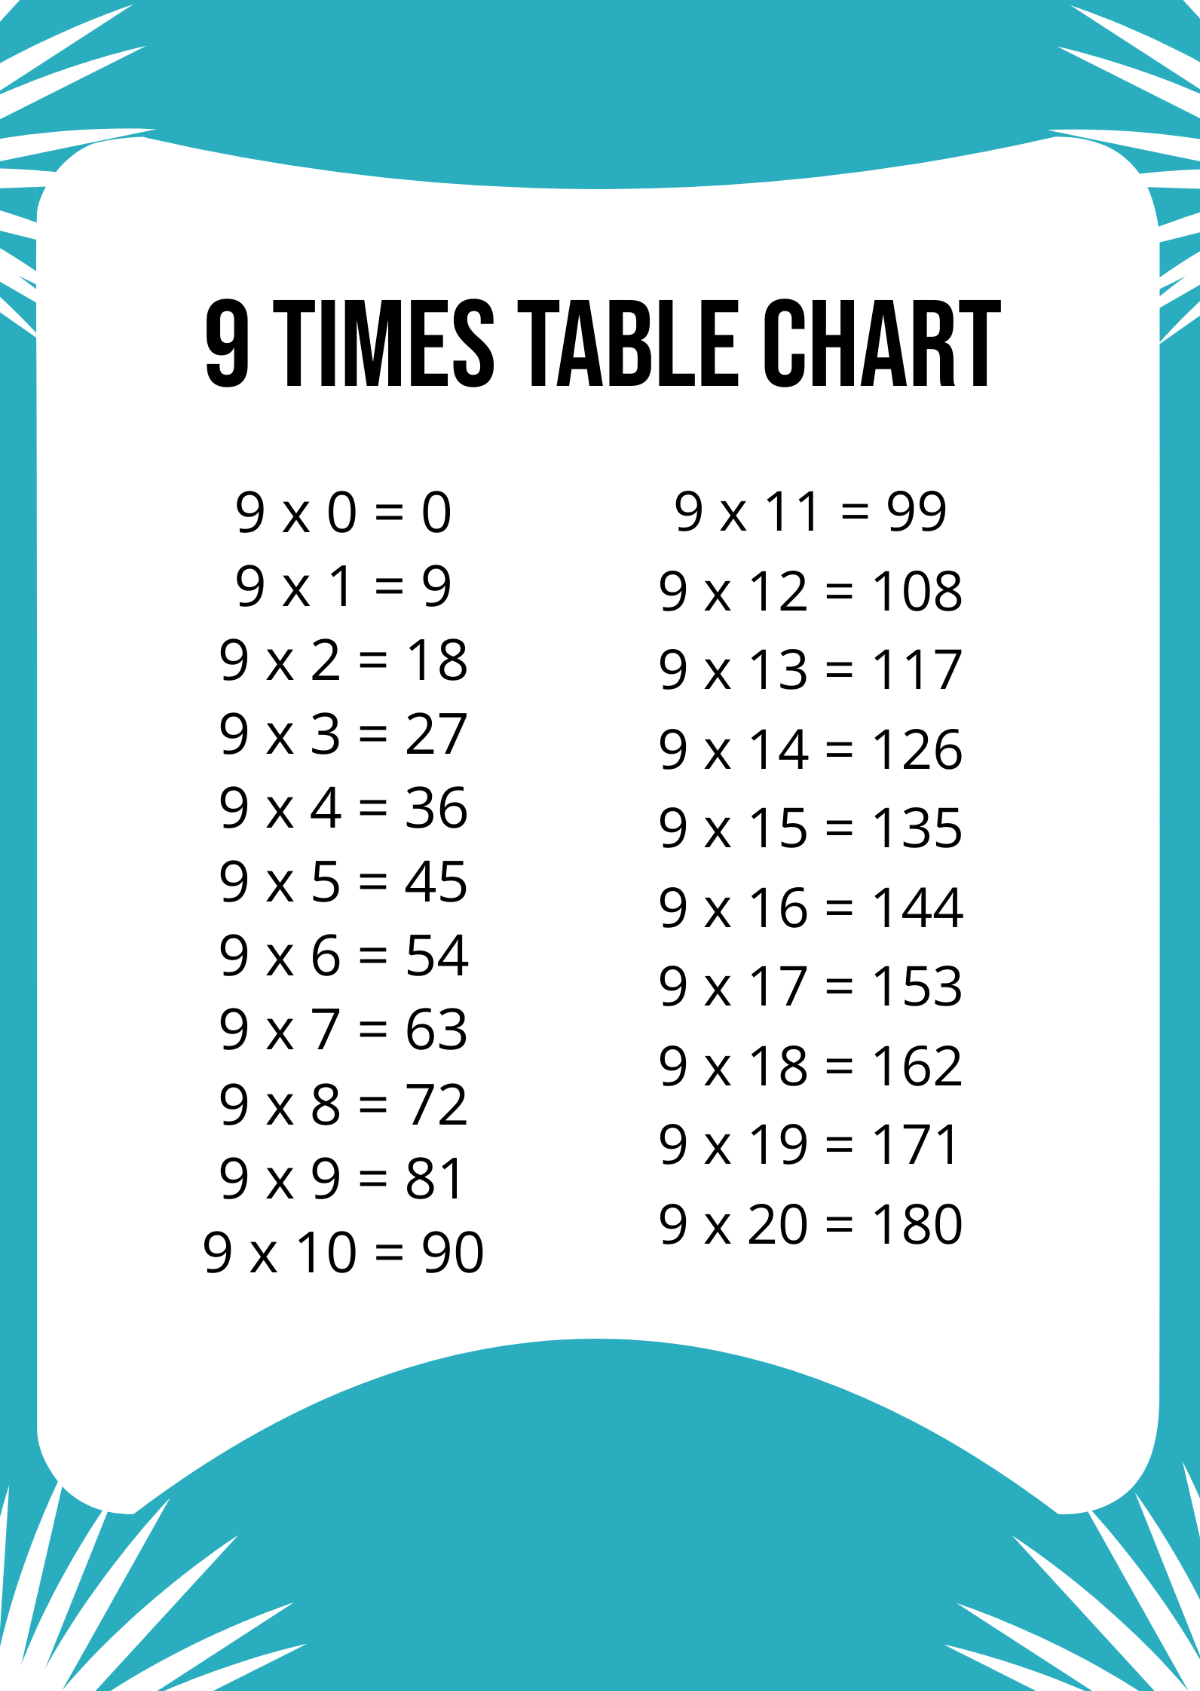 9 Times Table Chart Template